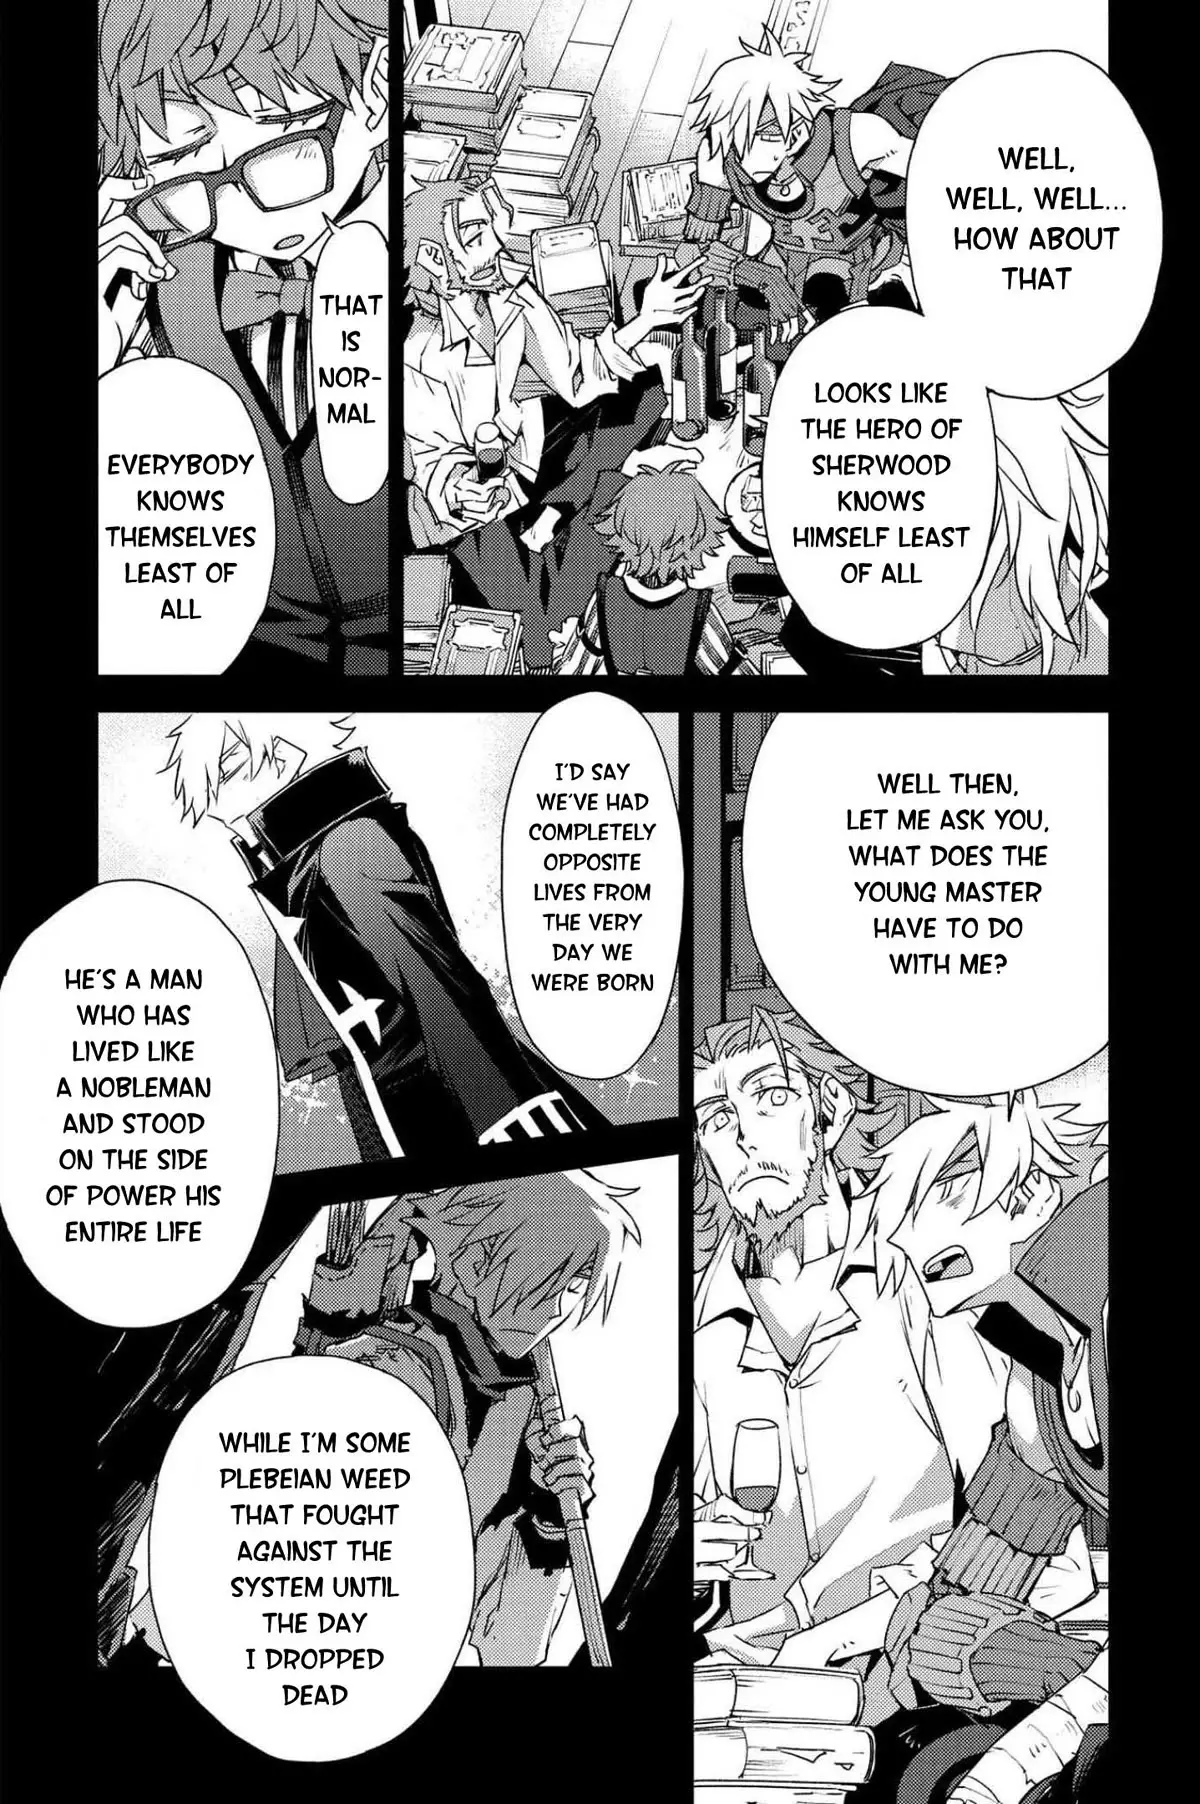 Fate/grand Order: Epic Of Remnant - Subspecies Singularity Iv: Taboo Advent Salem: Salem Of Heresy - 25 page 7-dd422951